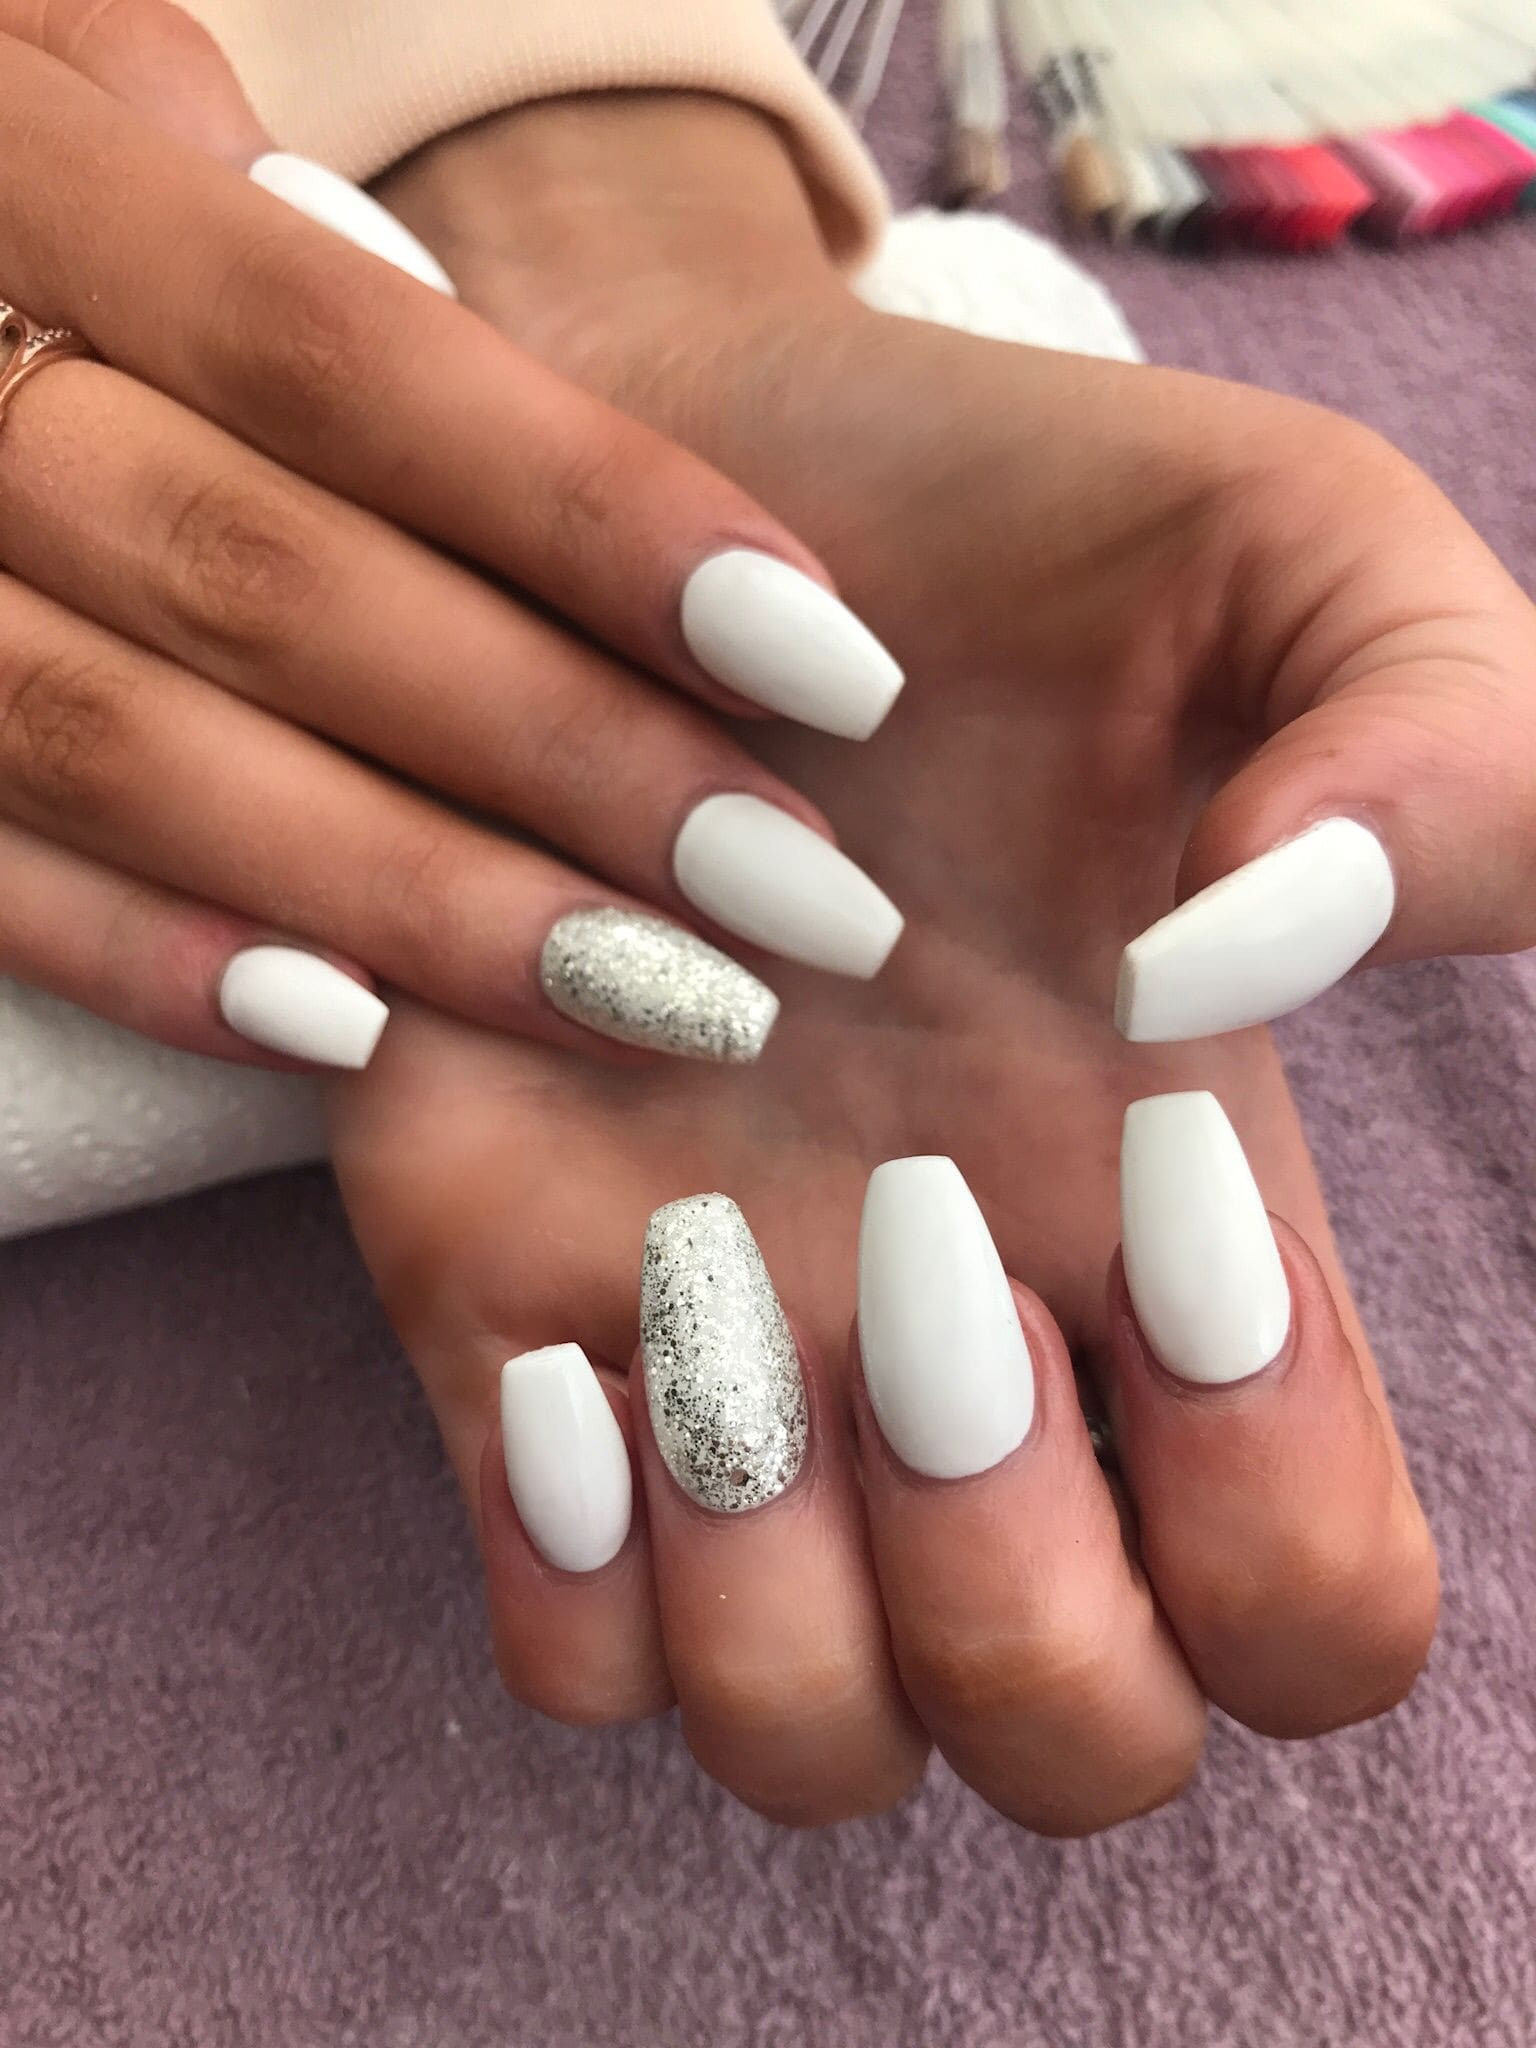 White Acrylic Nails With Glitter
 6 Best New Acrylic Nail Designs 2018 ⋆ Fitnailslover